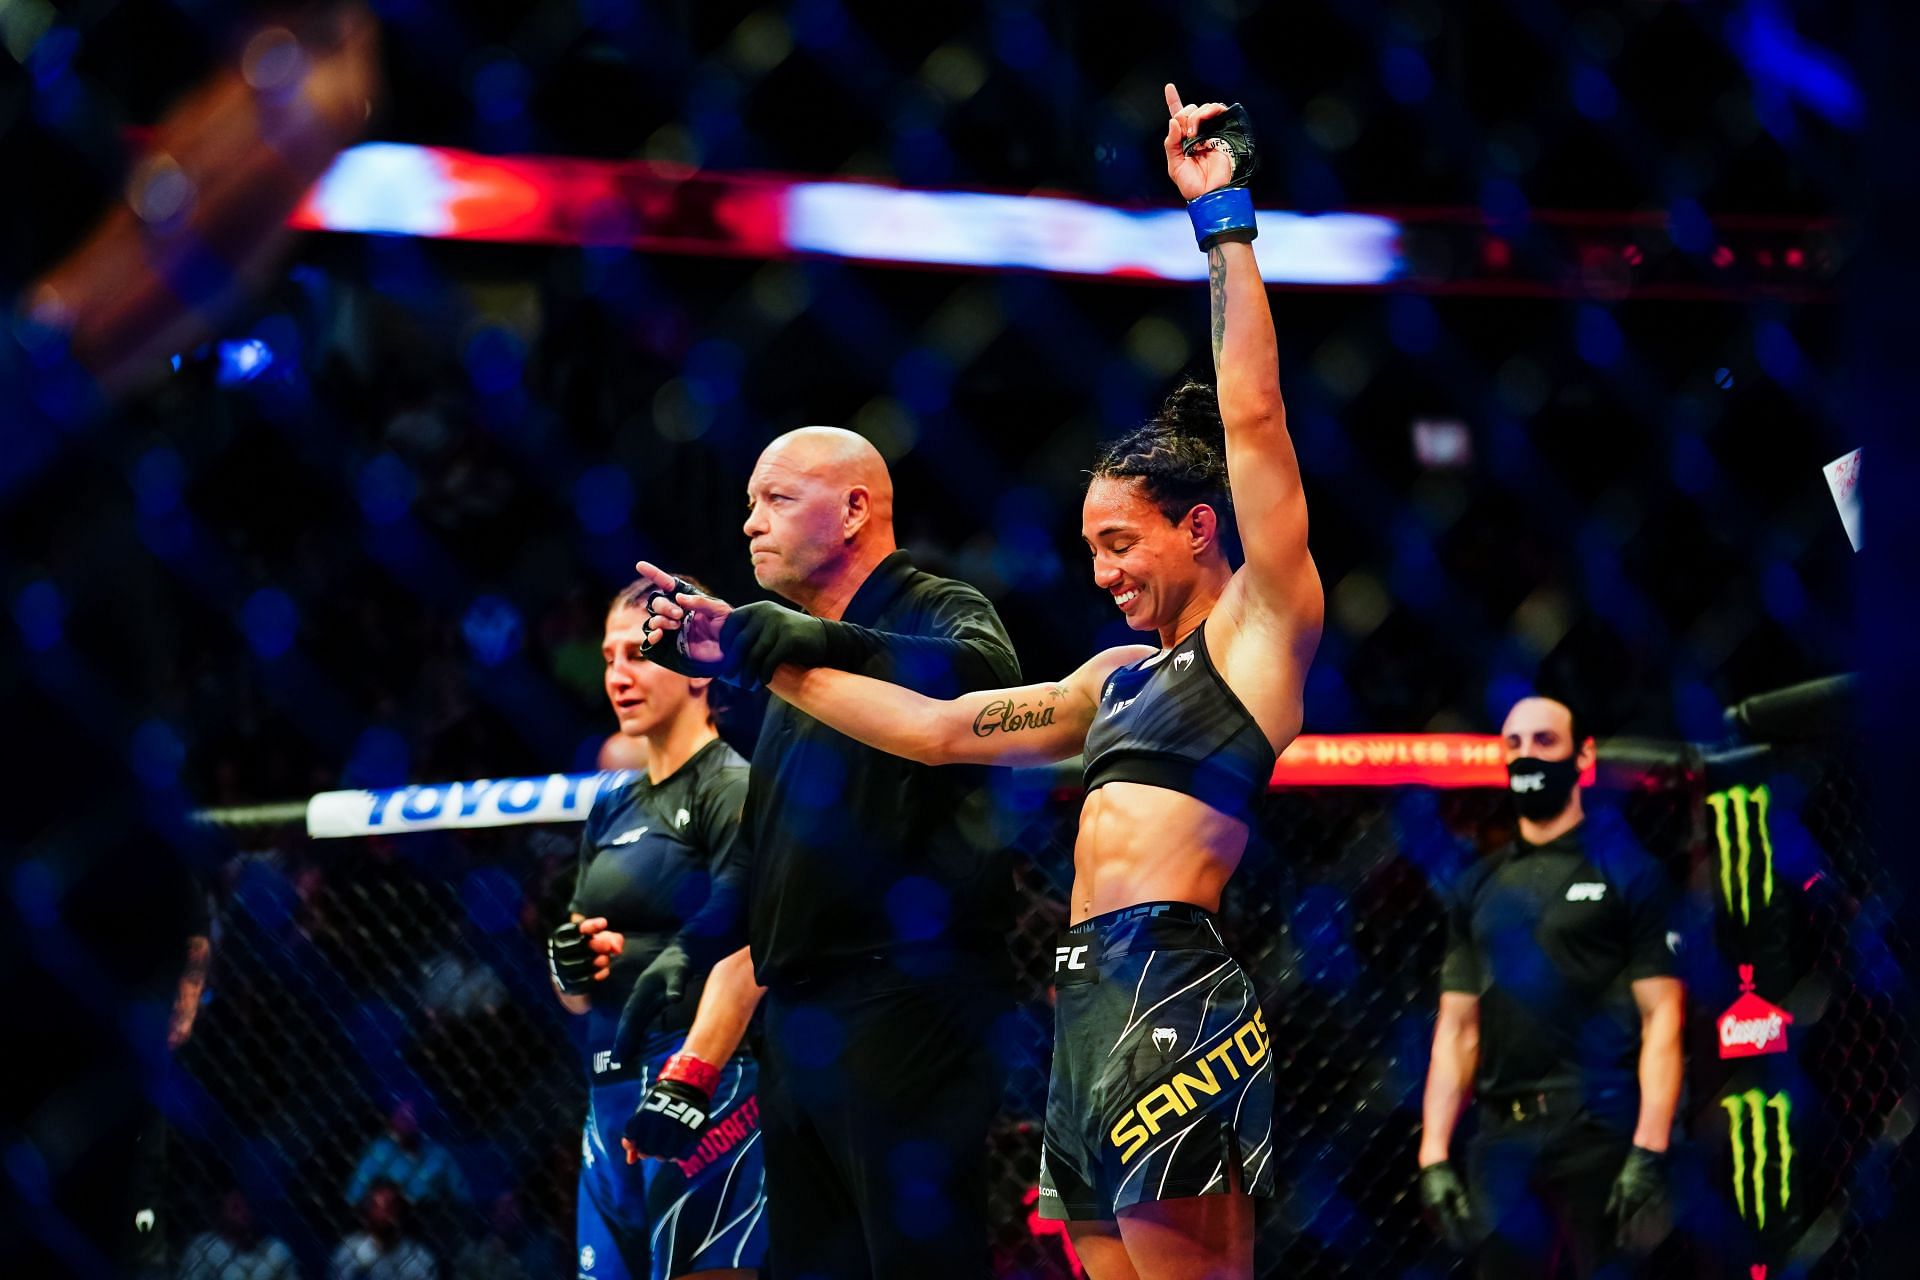 If Taila Santos beats Valentina Shevchenko, it will be one of the biggest upsets of all time